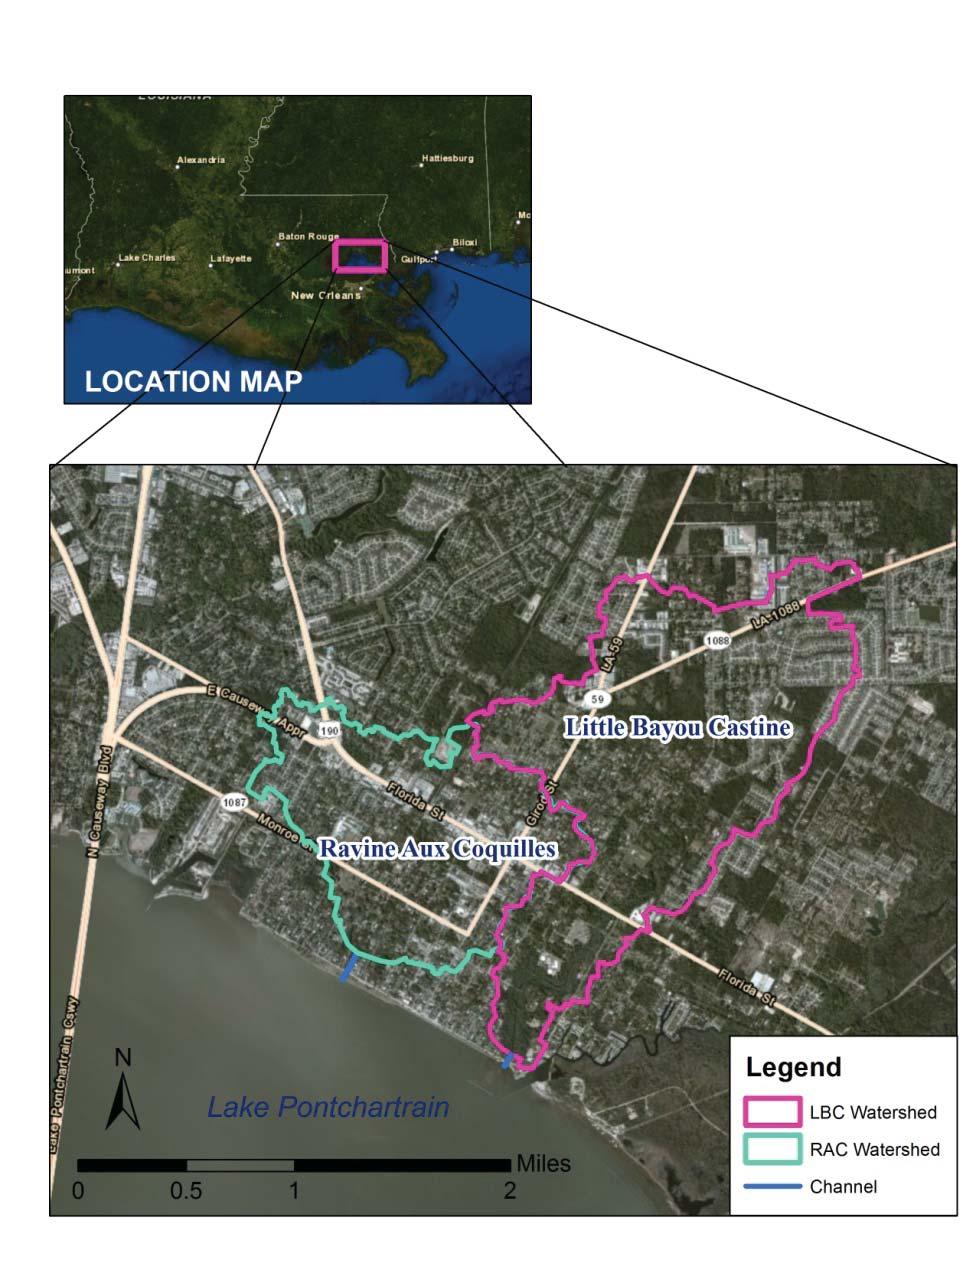 SITE DESCRIPTION The city of Mandeville, LA lies on the north shore of Lake Pontchartrain (Figure 1). The areas adjacent to the lake are low-lying with elevations typically below 4.